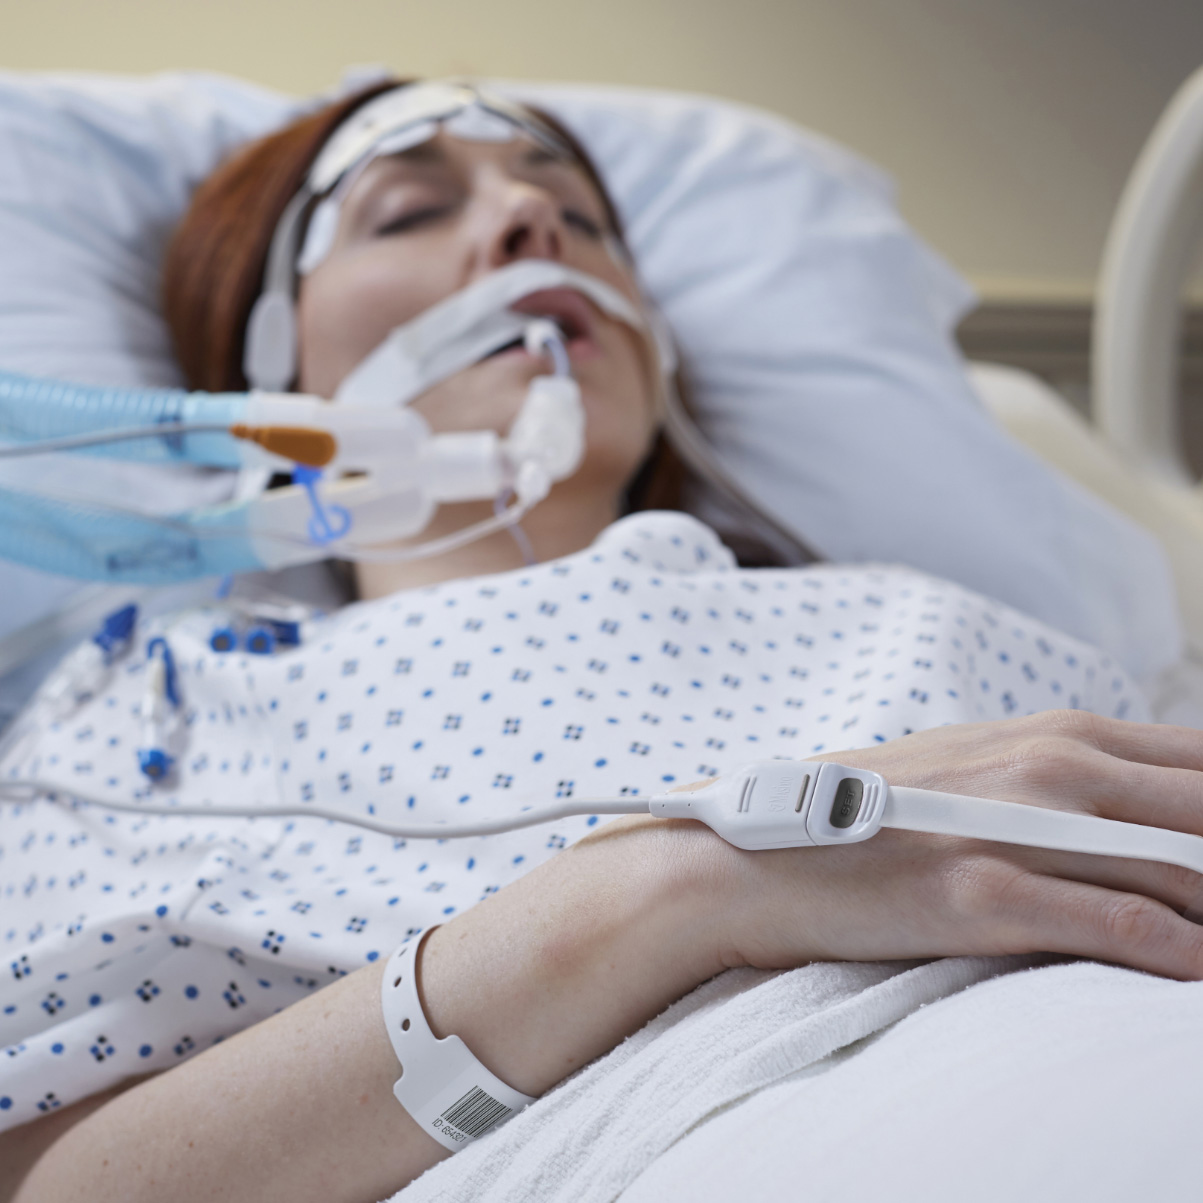 Sleeping patient intubated in hospital bed being monitored with a Masimo RD SET sensor.